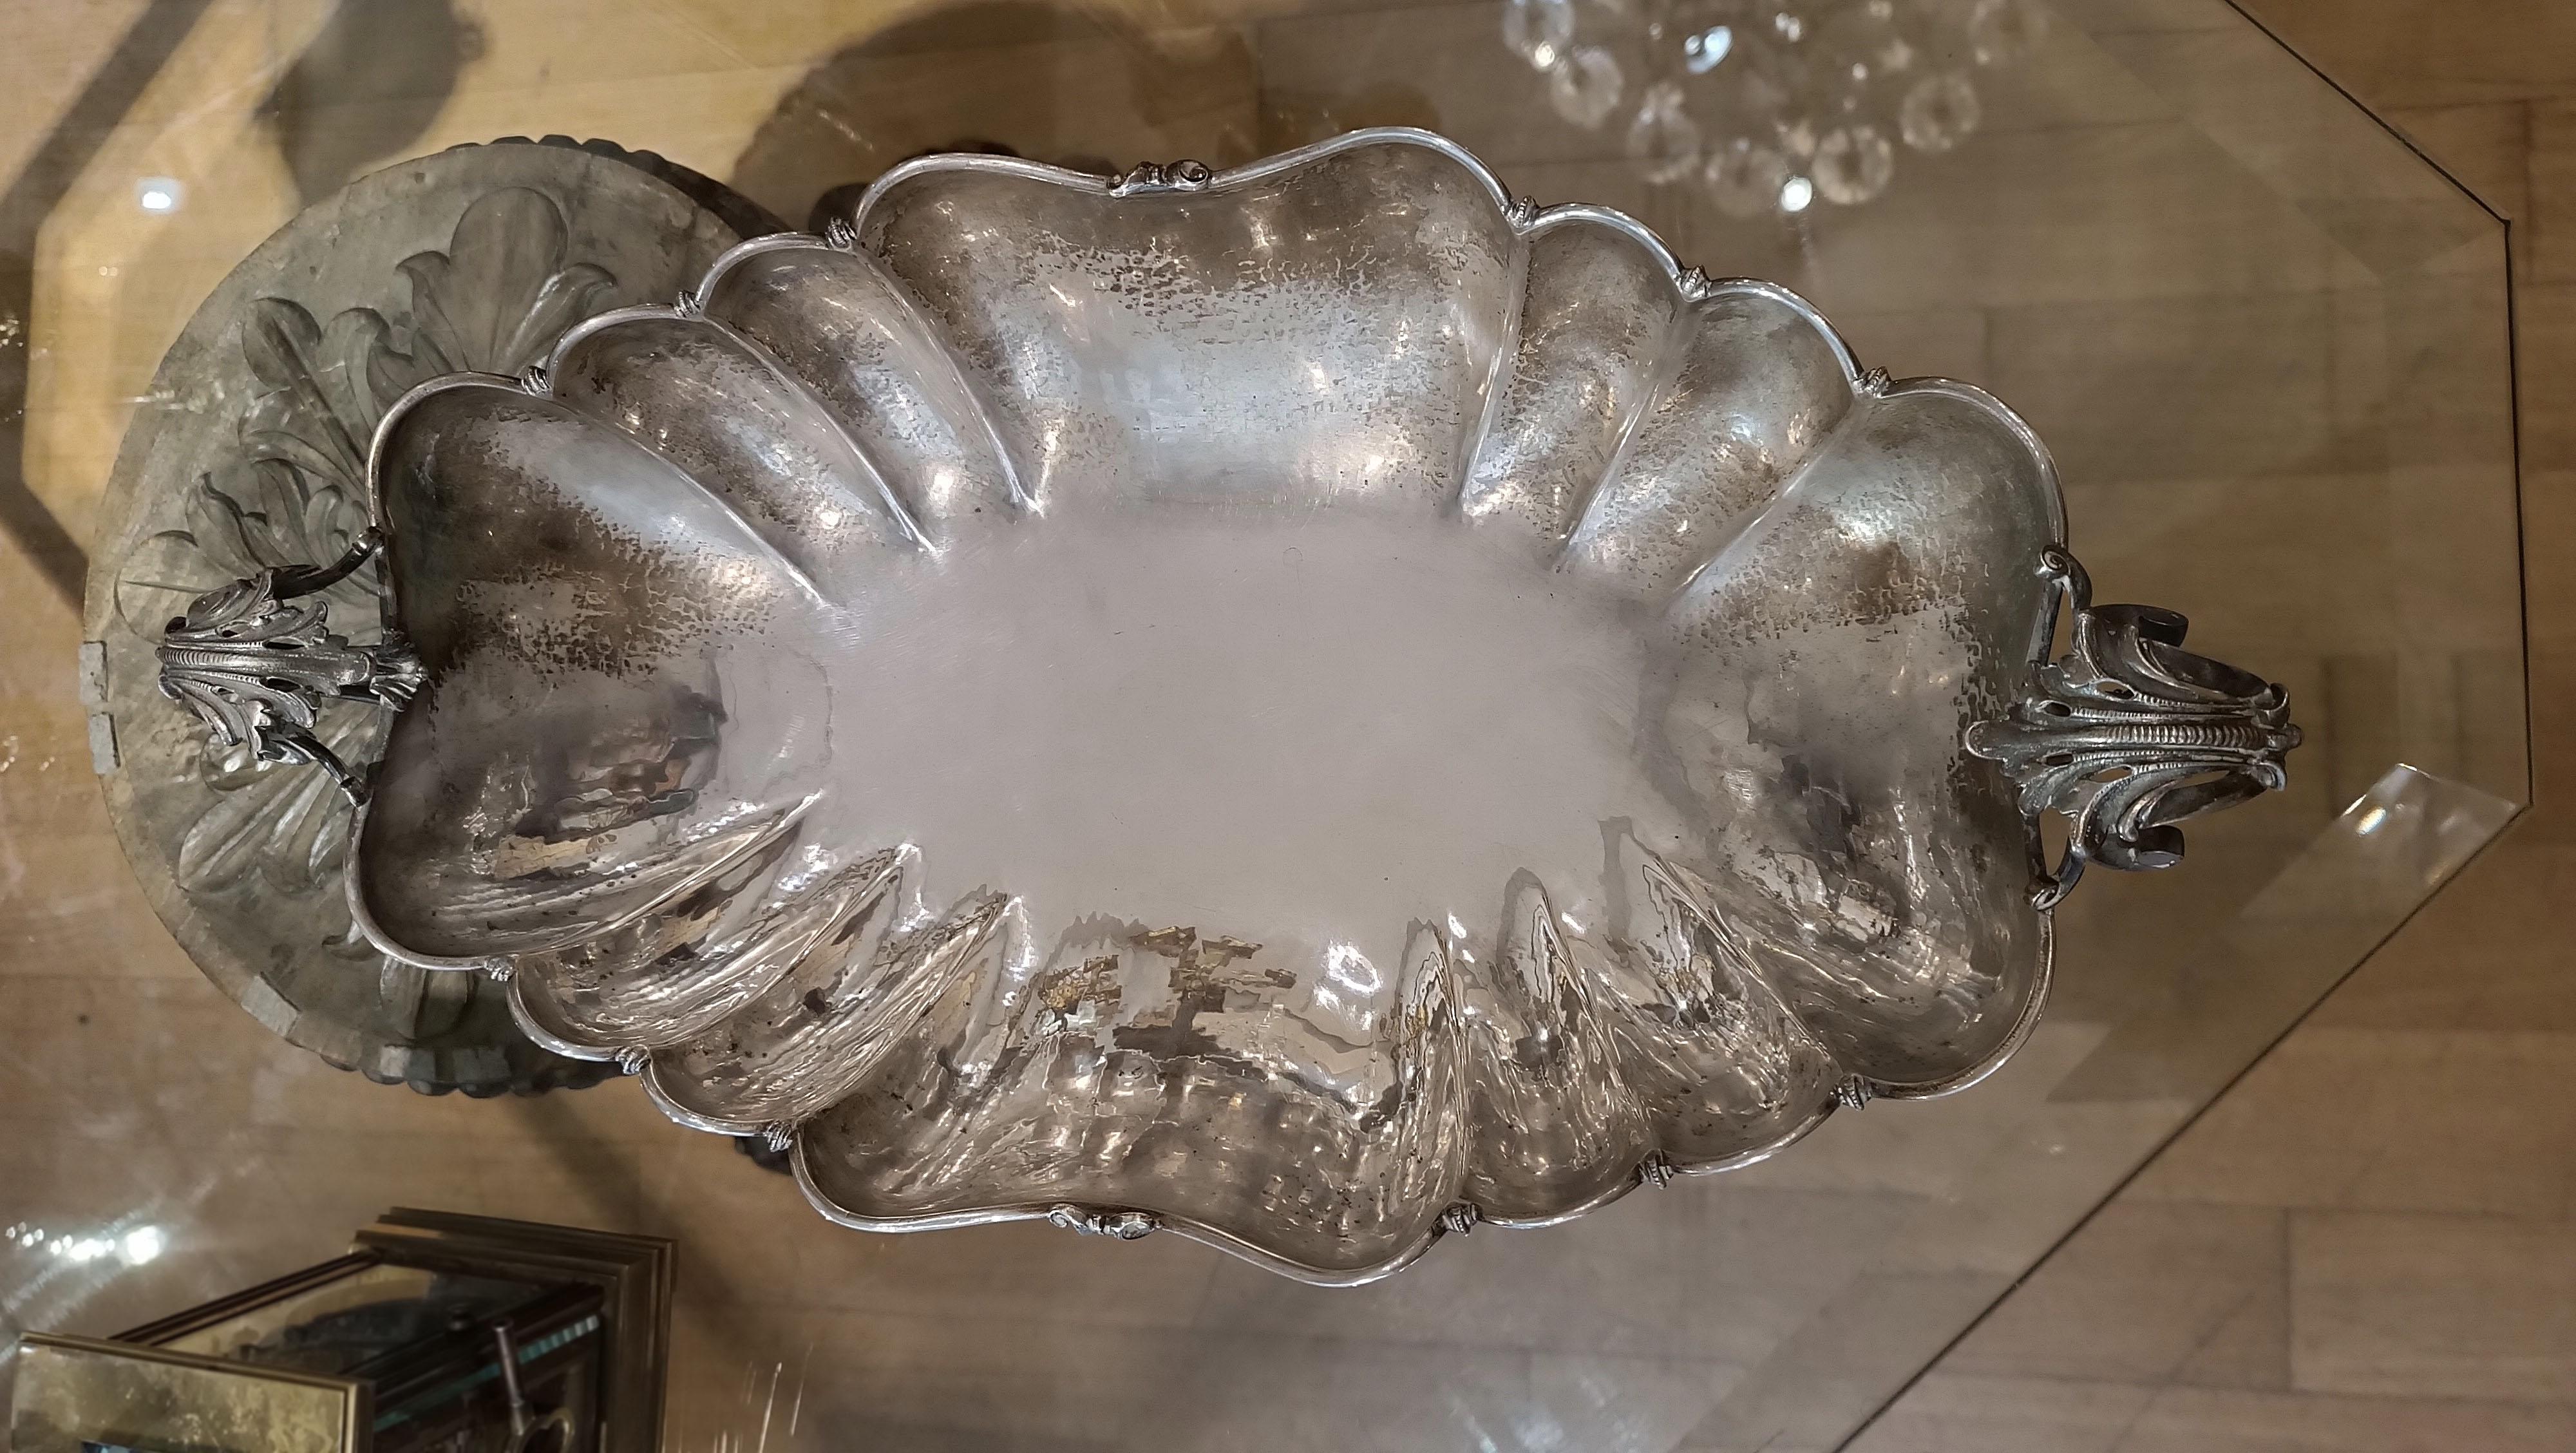 LATE 19th-EARLY 20th CENTURY ITALIAN SILVER CENTERPIECE For Sale 7